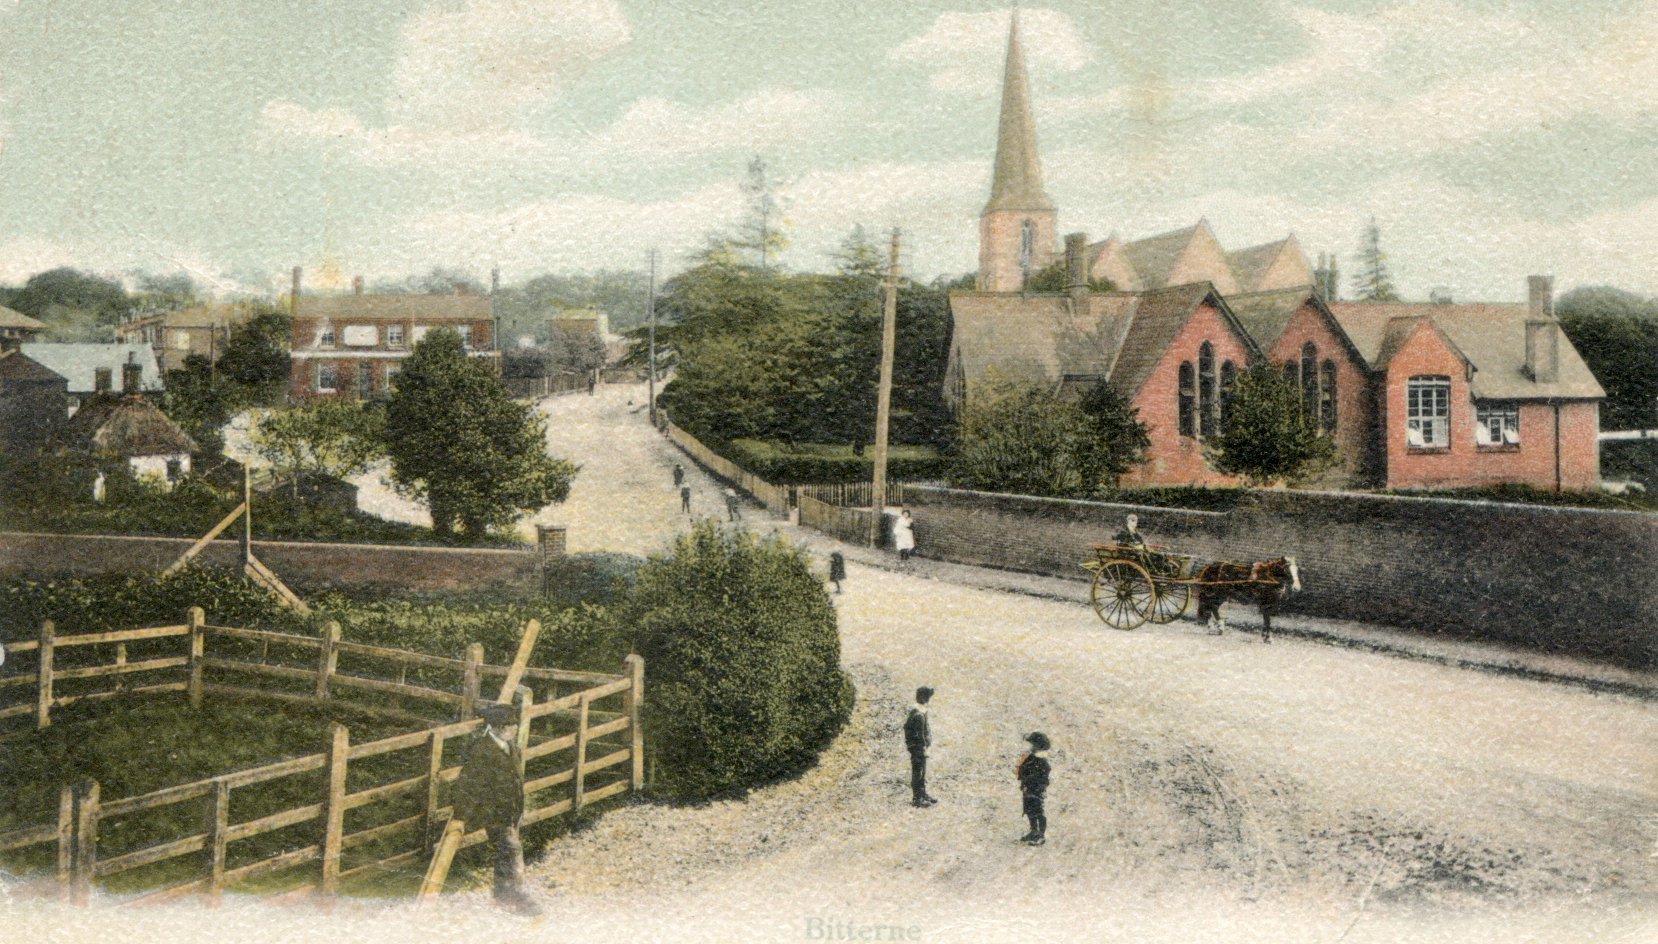 Bitterne Church, School and Red Lion circa 1905